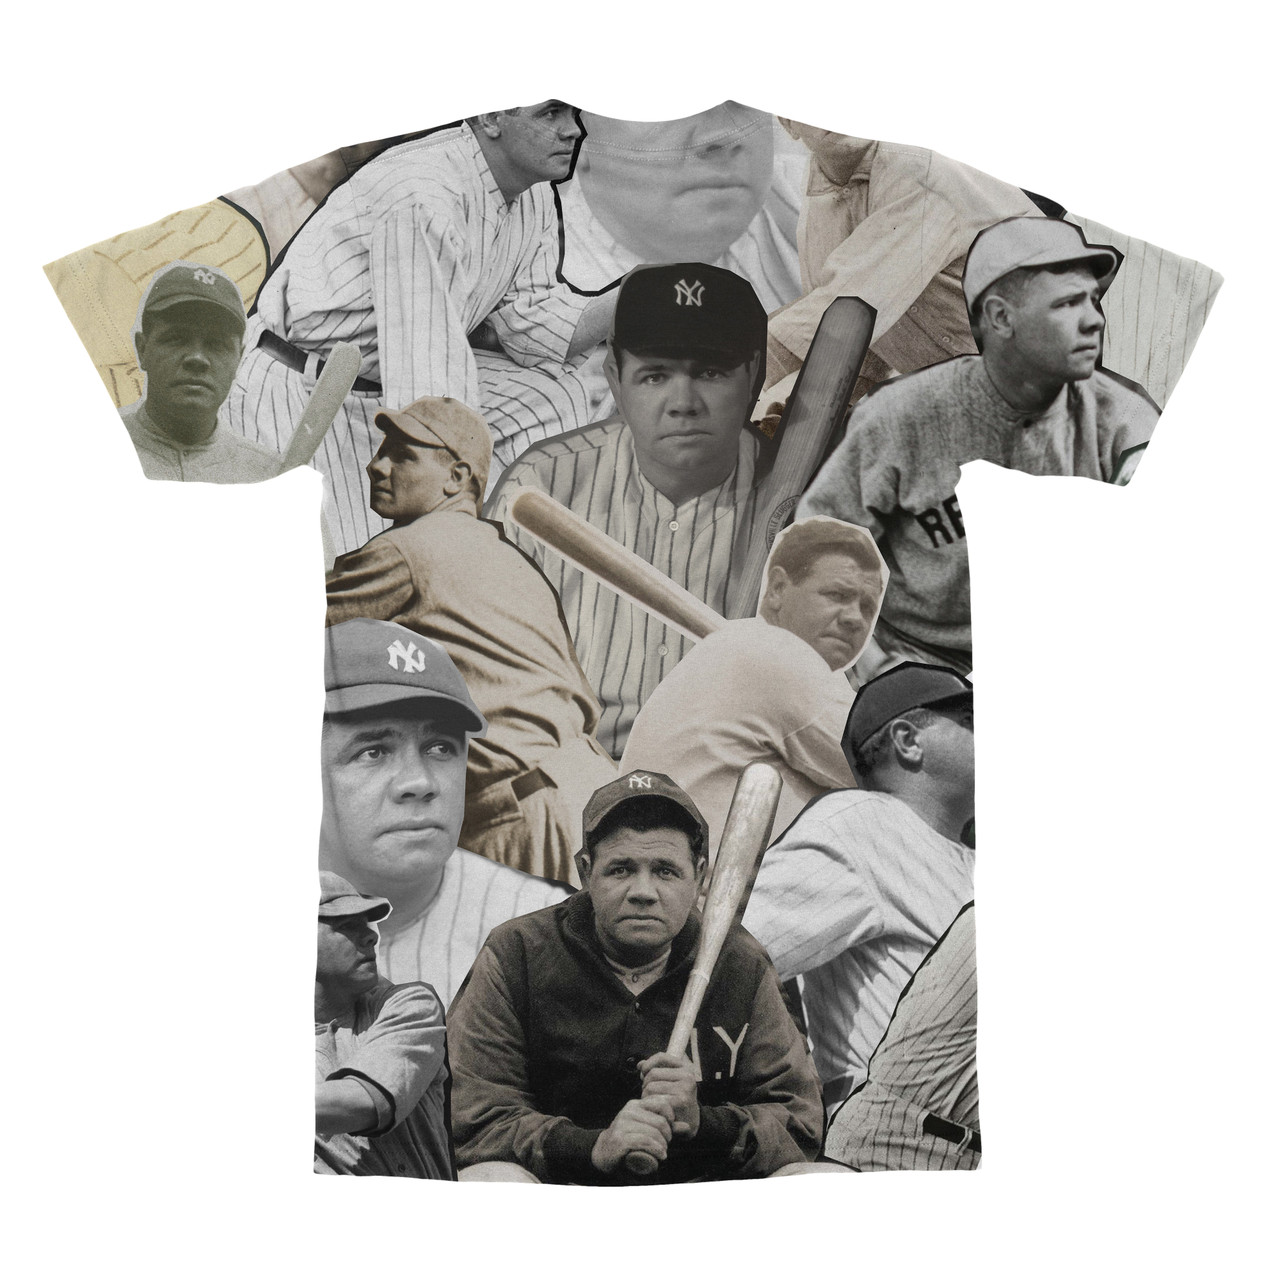 Babe Ruth Photo Collage T-Shirt